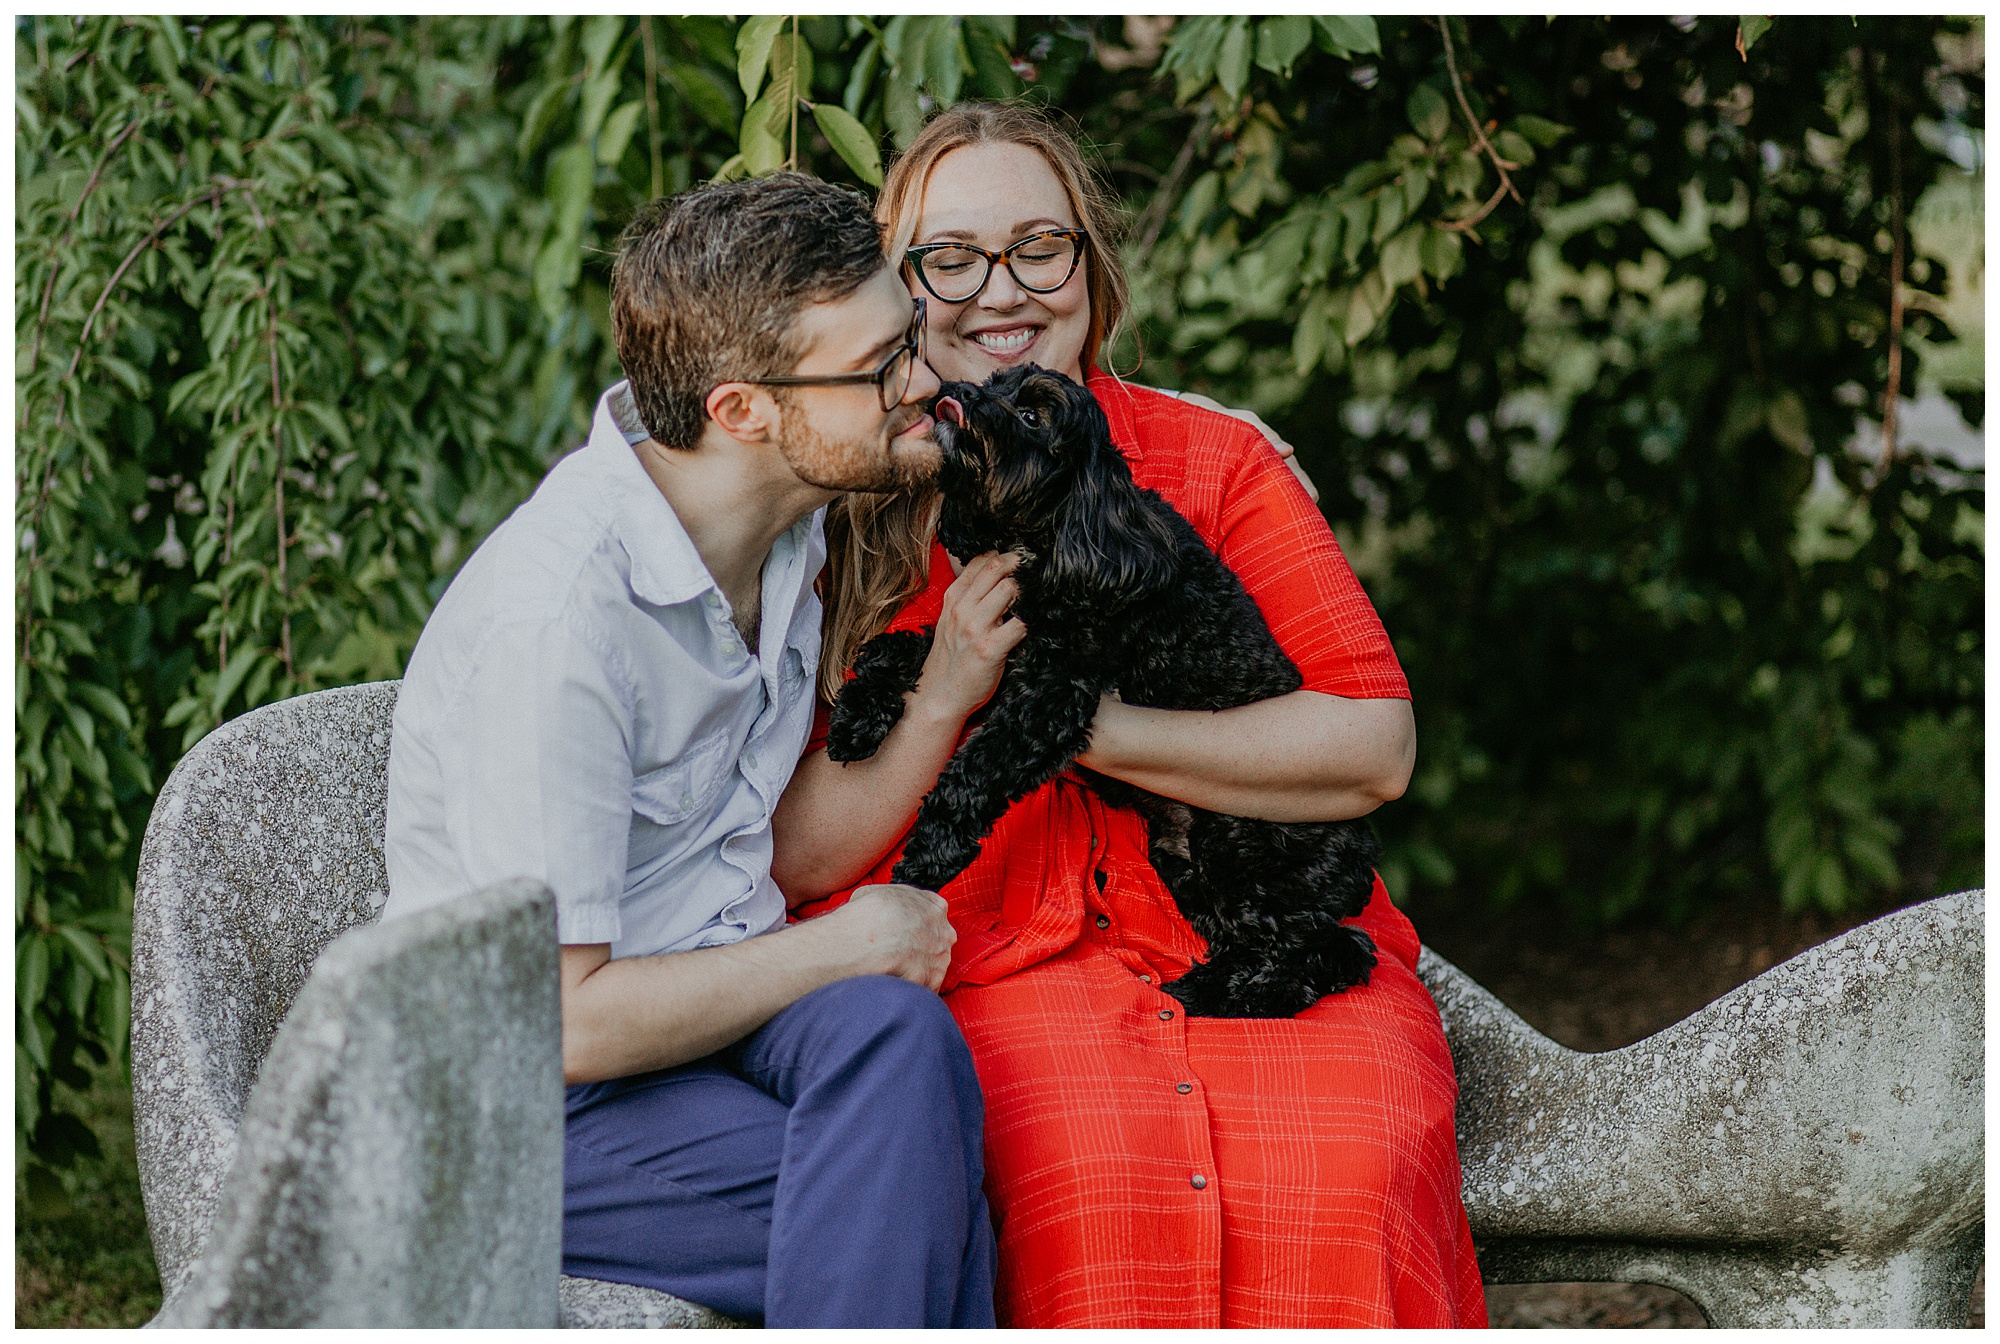 Engagement session at Centennial Park with black puppy.